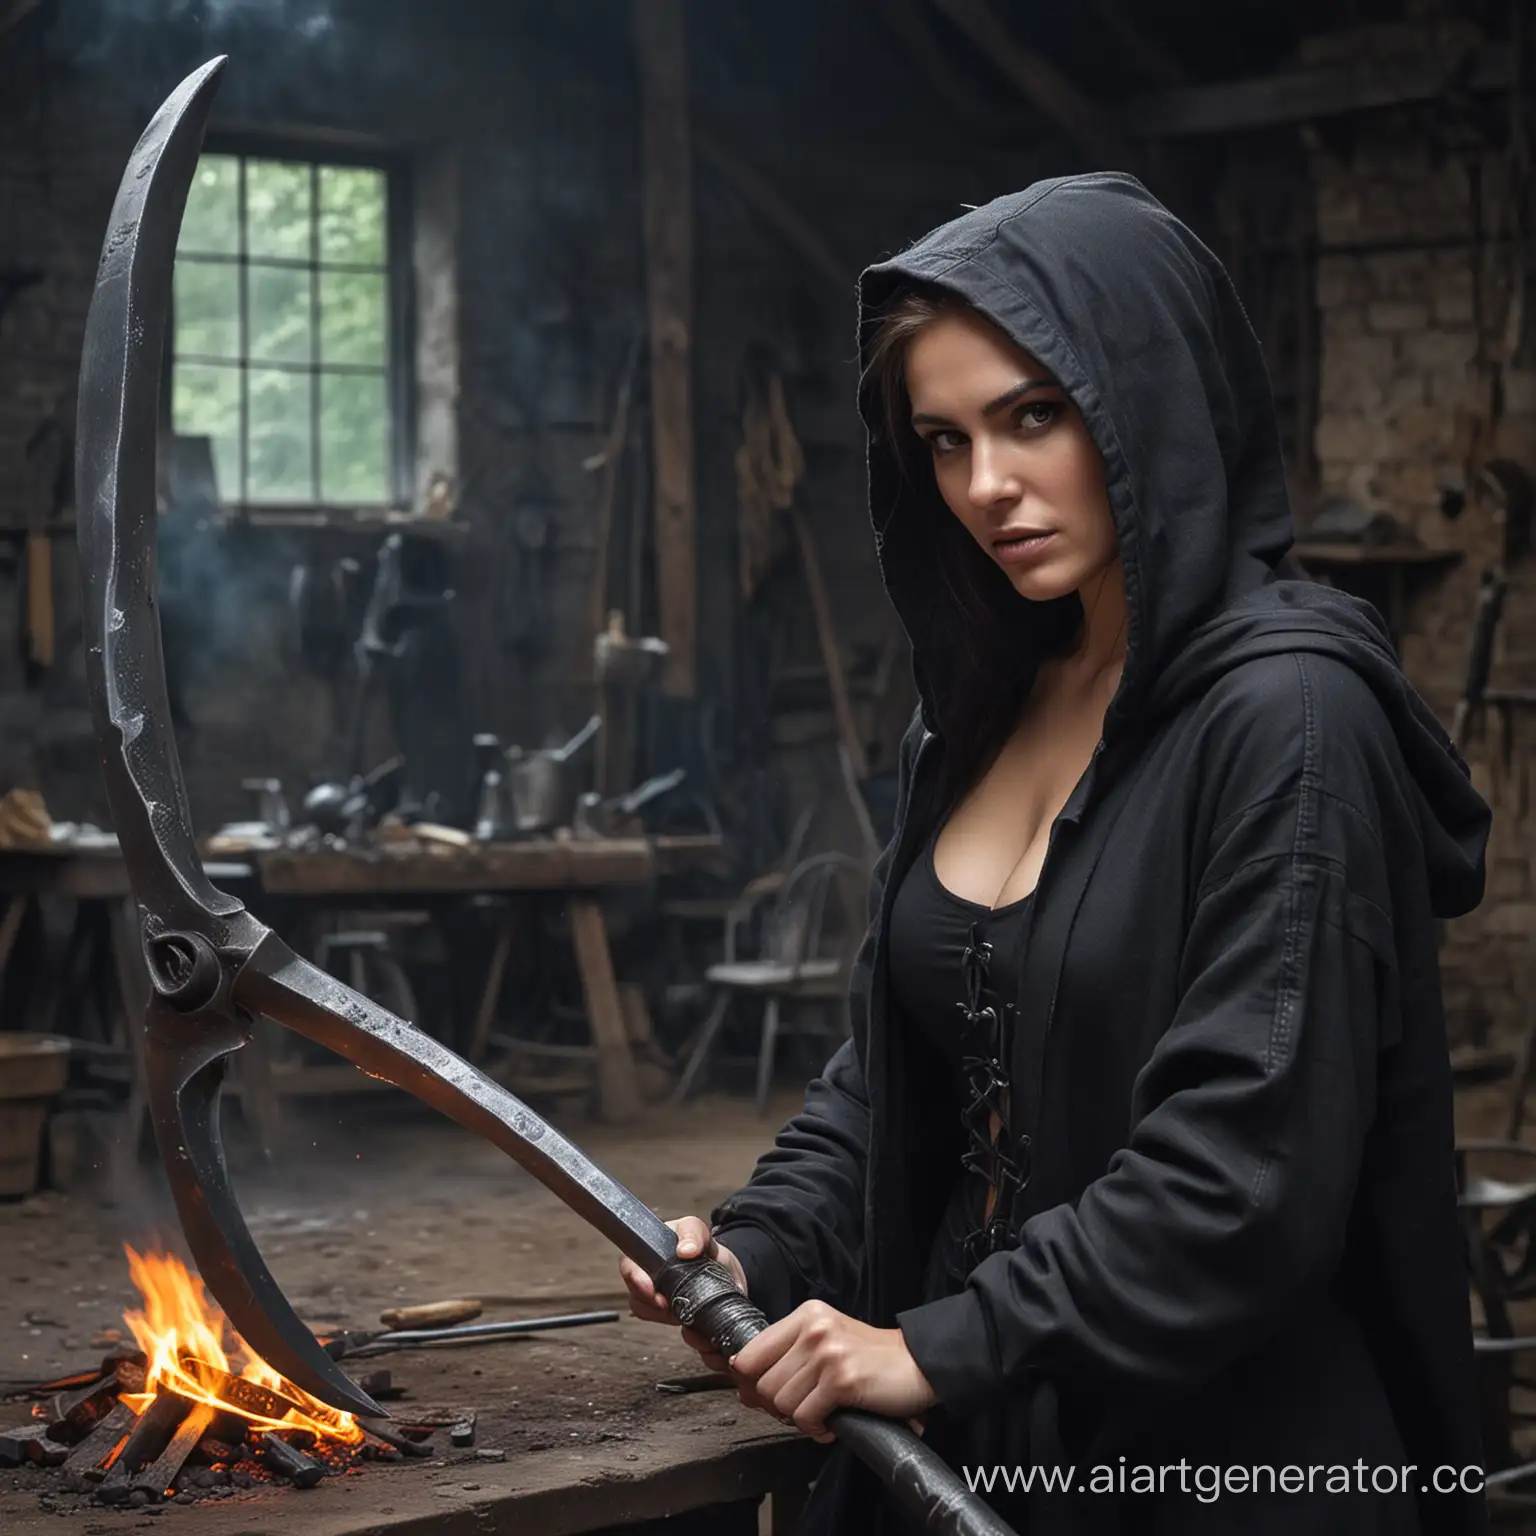 Grim-Reaper-Woman-with-Scythe-at-Forge-with-Blacksmith